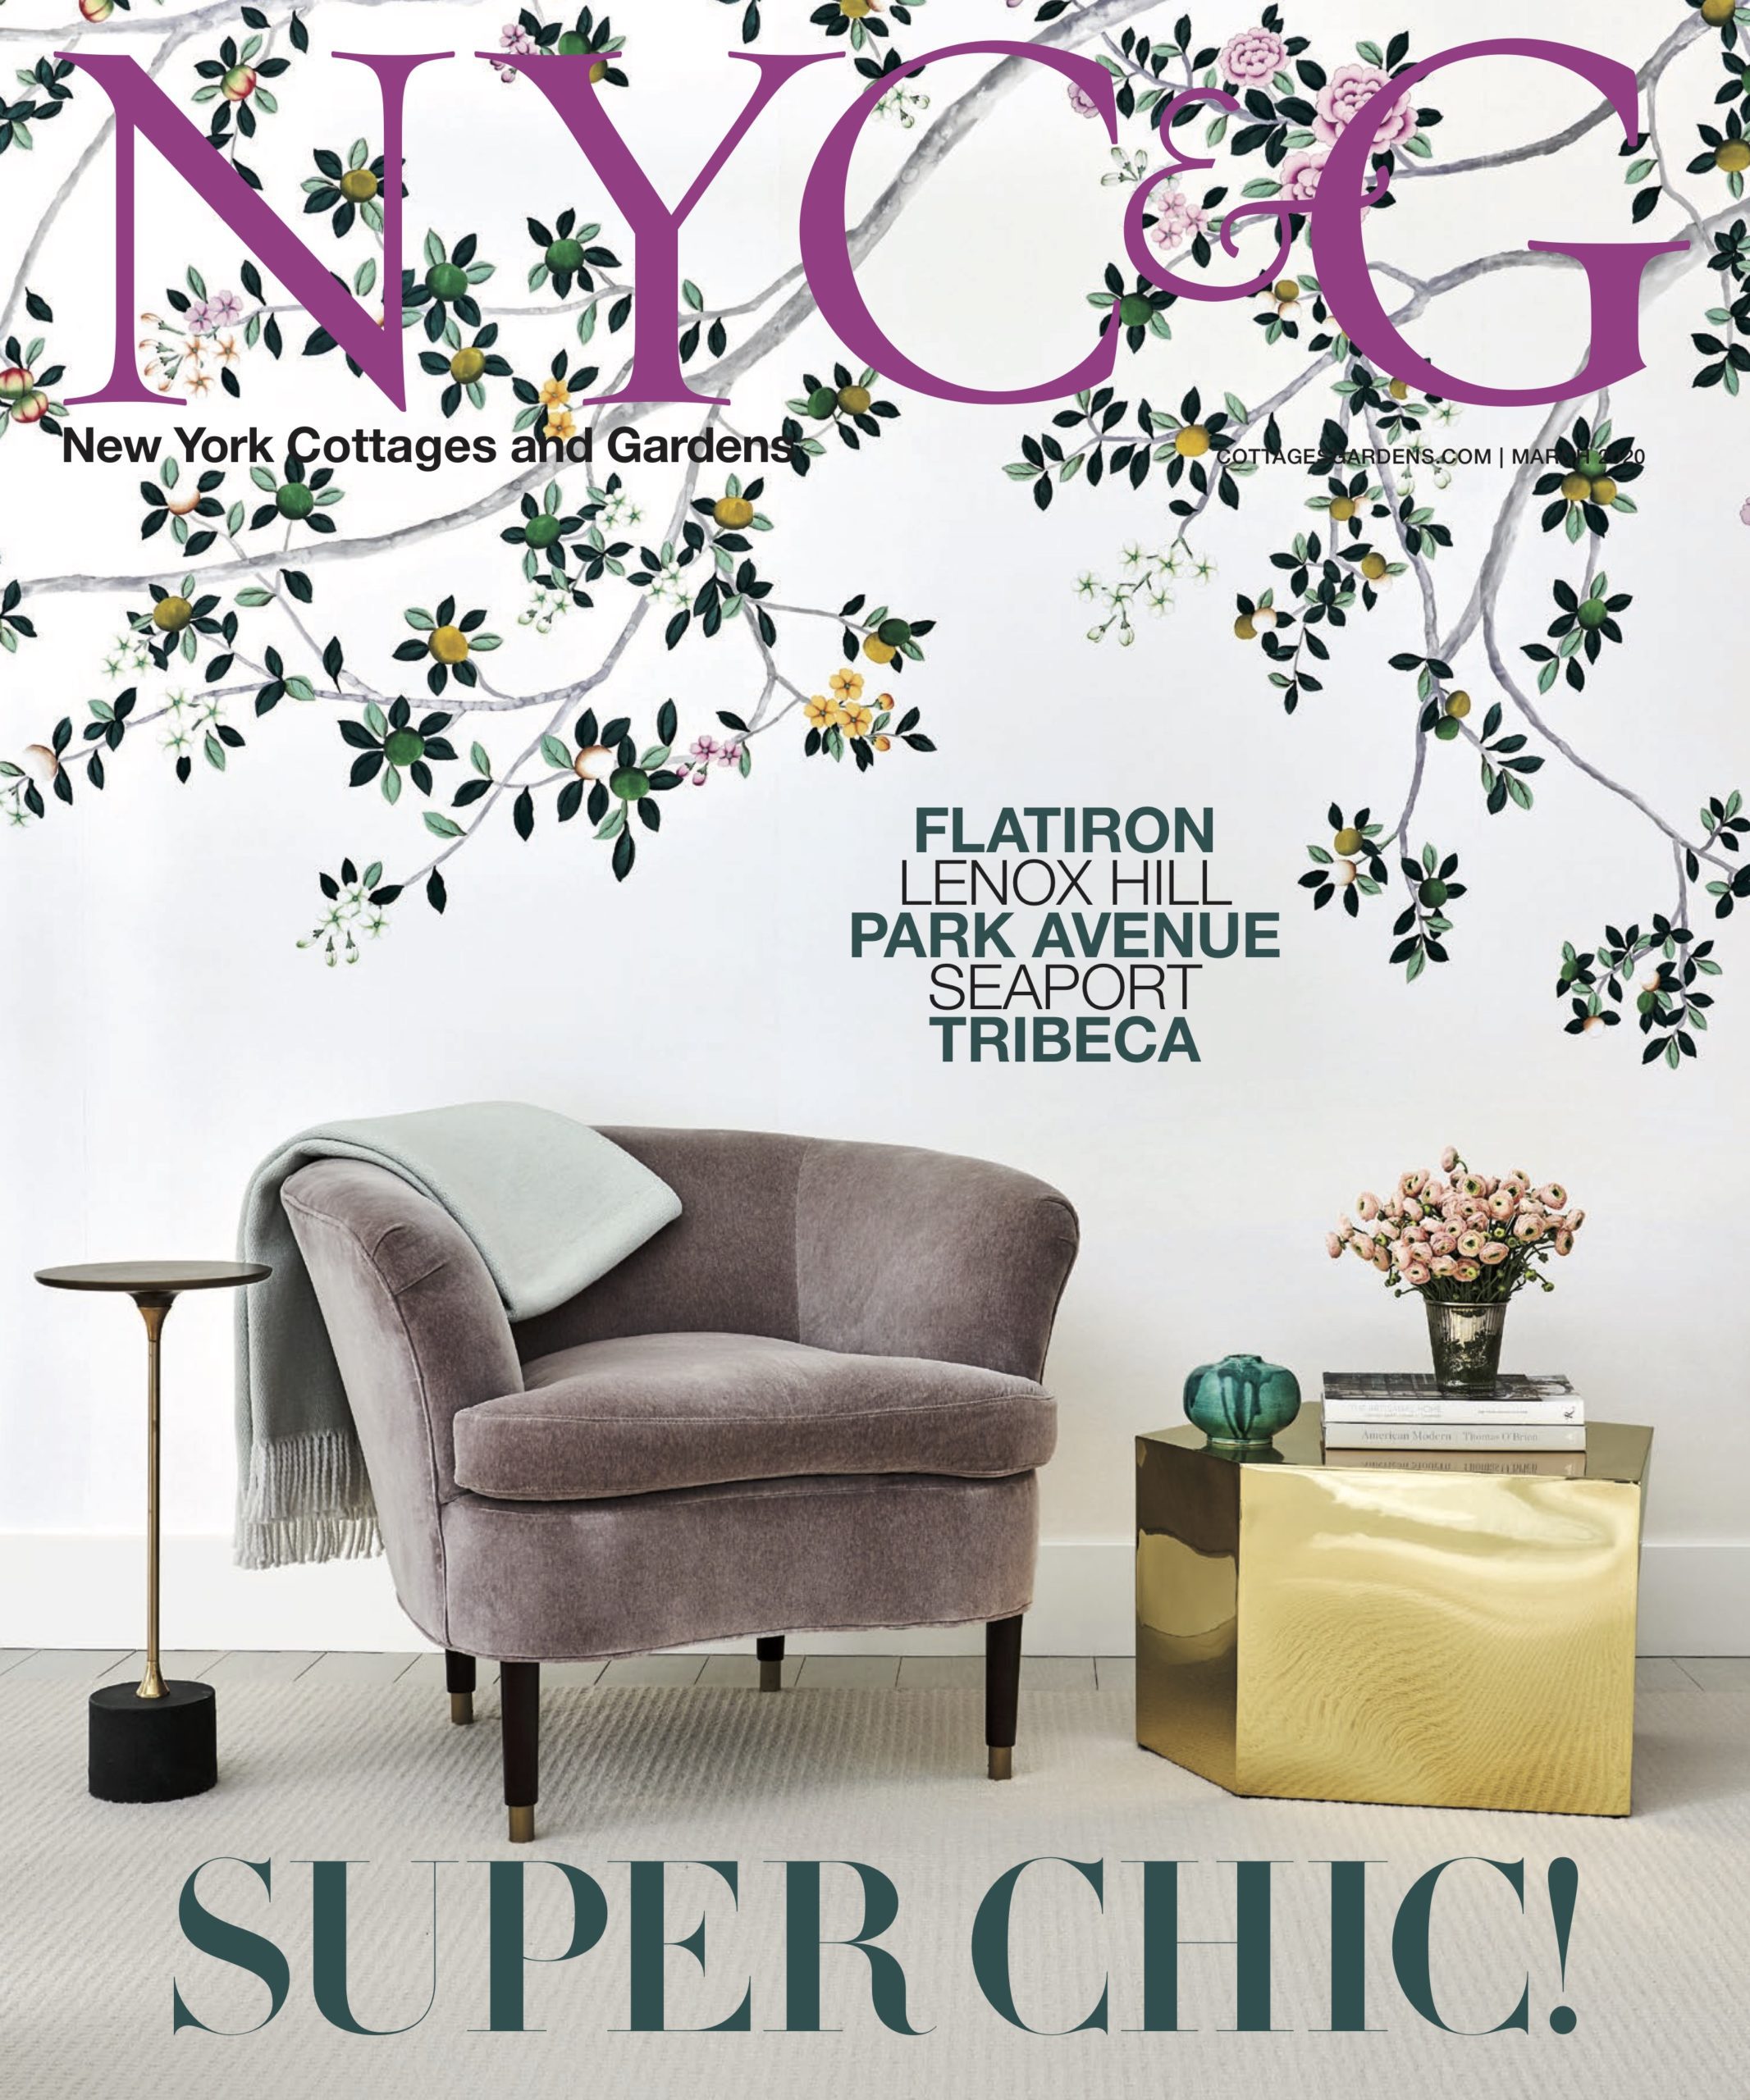 New York Cottages and Gardens Magazine: "Super Chic!", March 2020